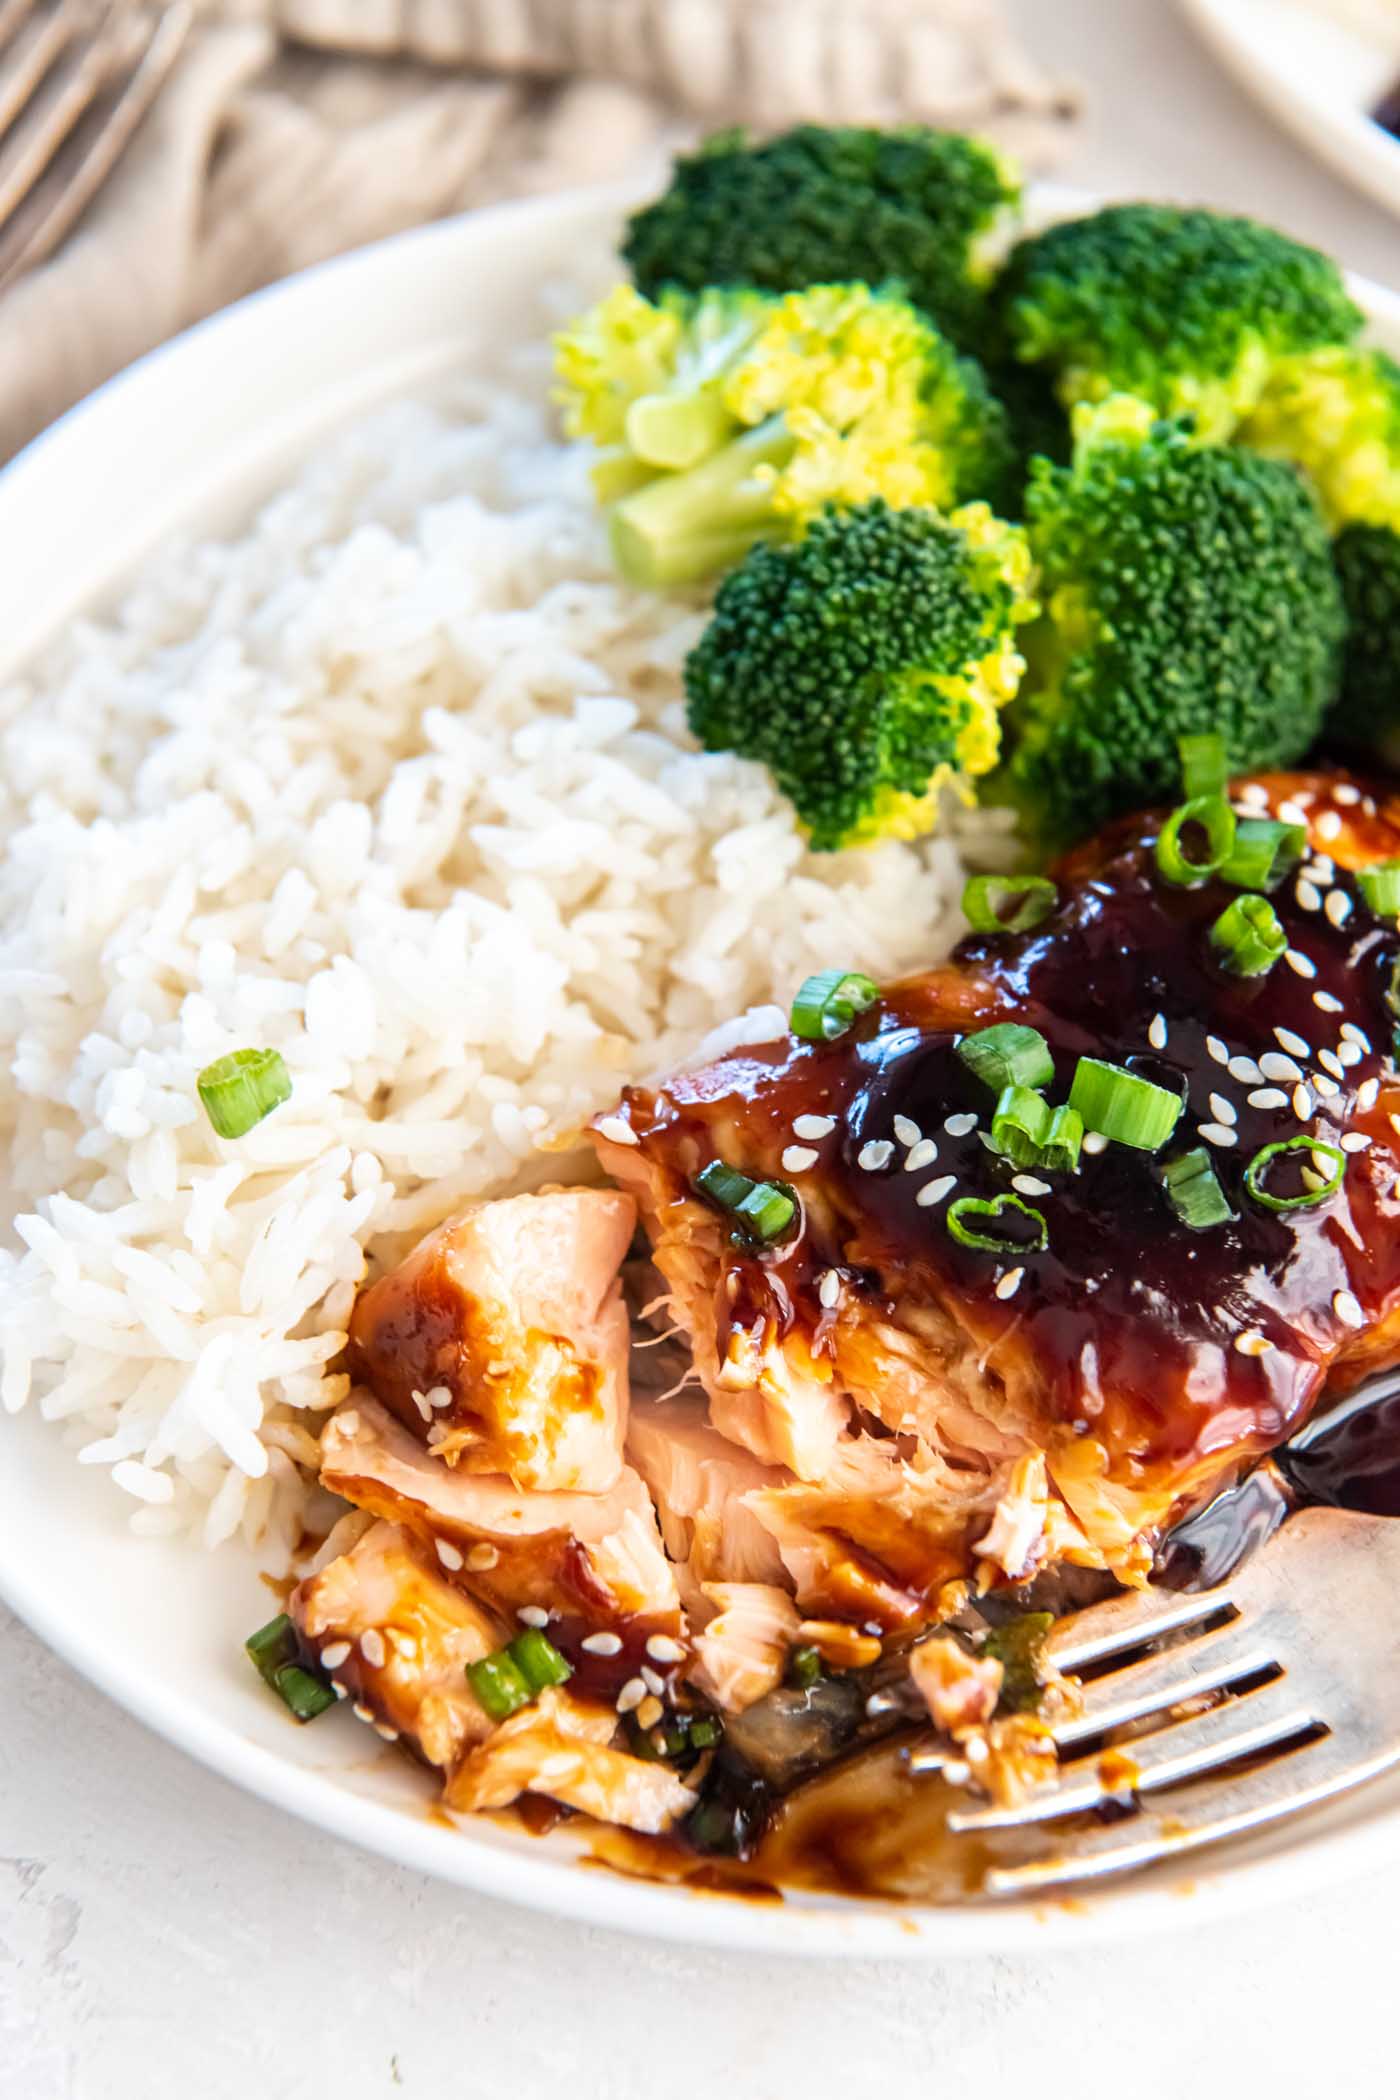 Fillet of teriyaki salmon partially flaked with a fork, served with white rice and broccoli.